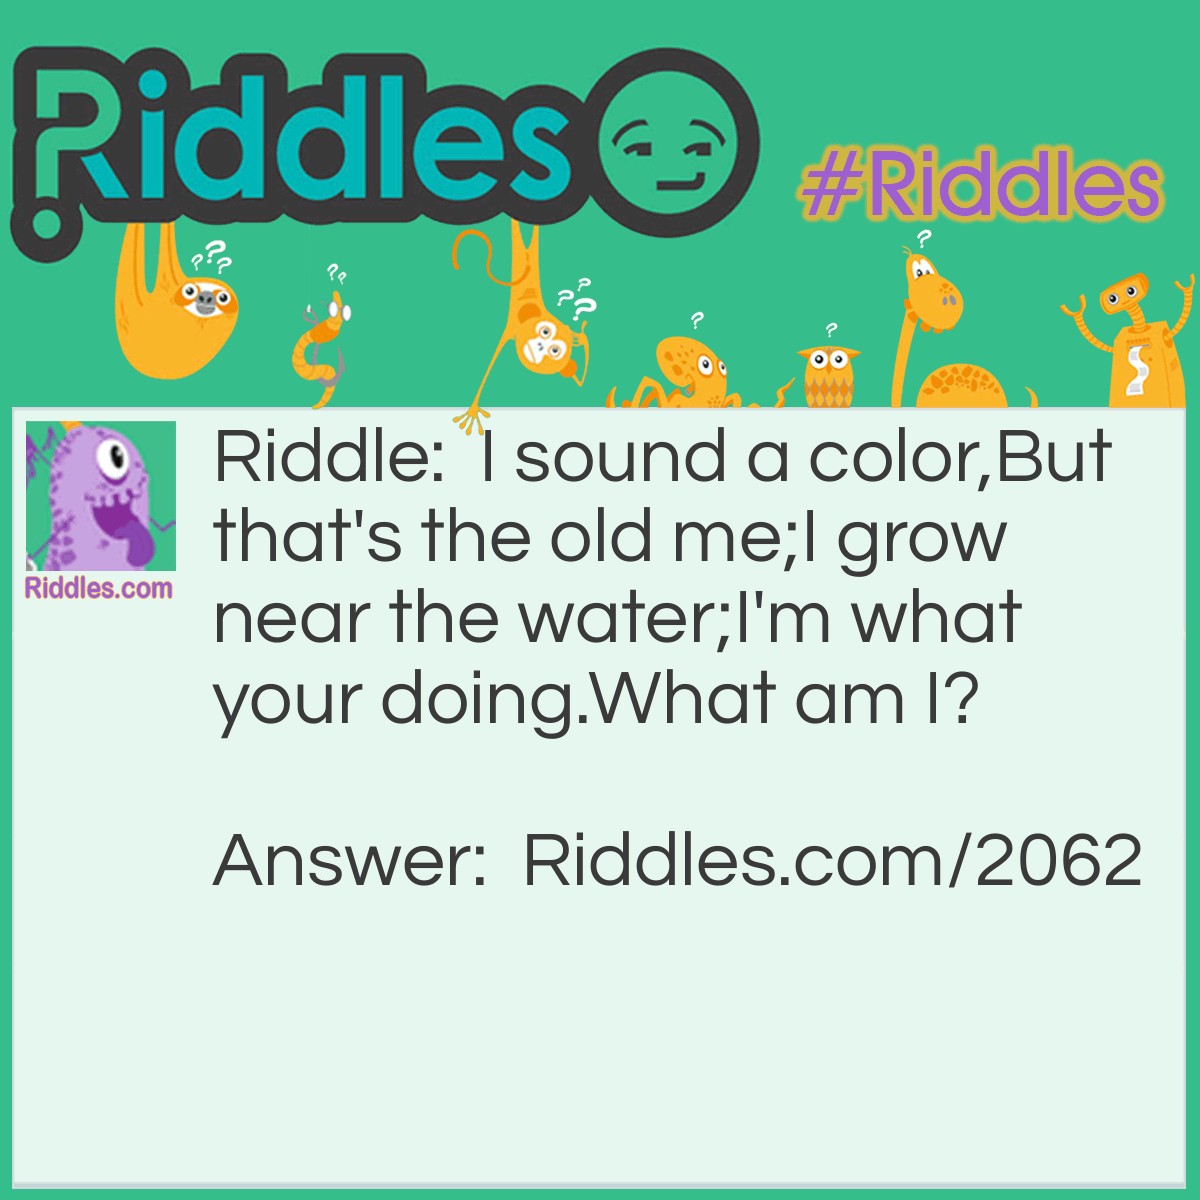 Riddle: I sound a color,
But that's the old me;
I grow near the water;
I'm what your doing.
What am I? Answer: Read/Reed